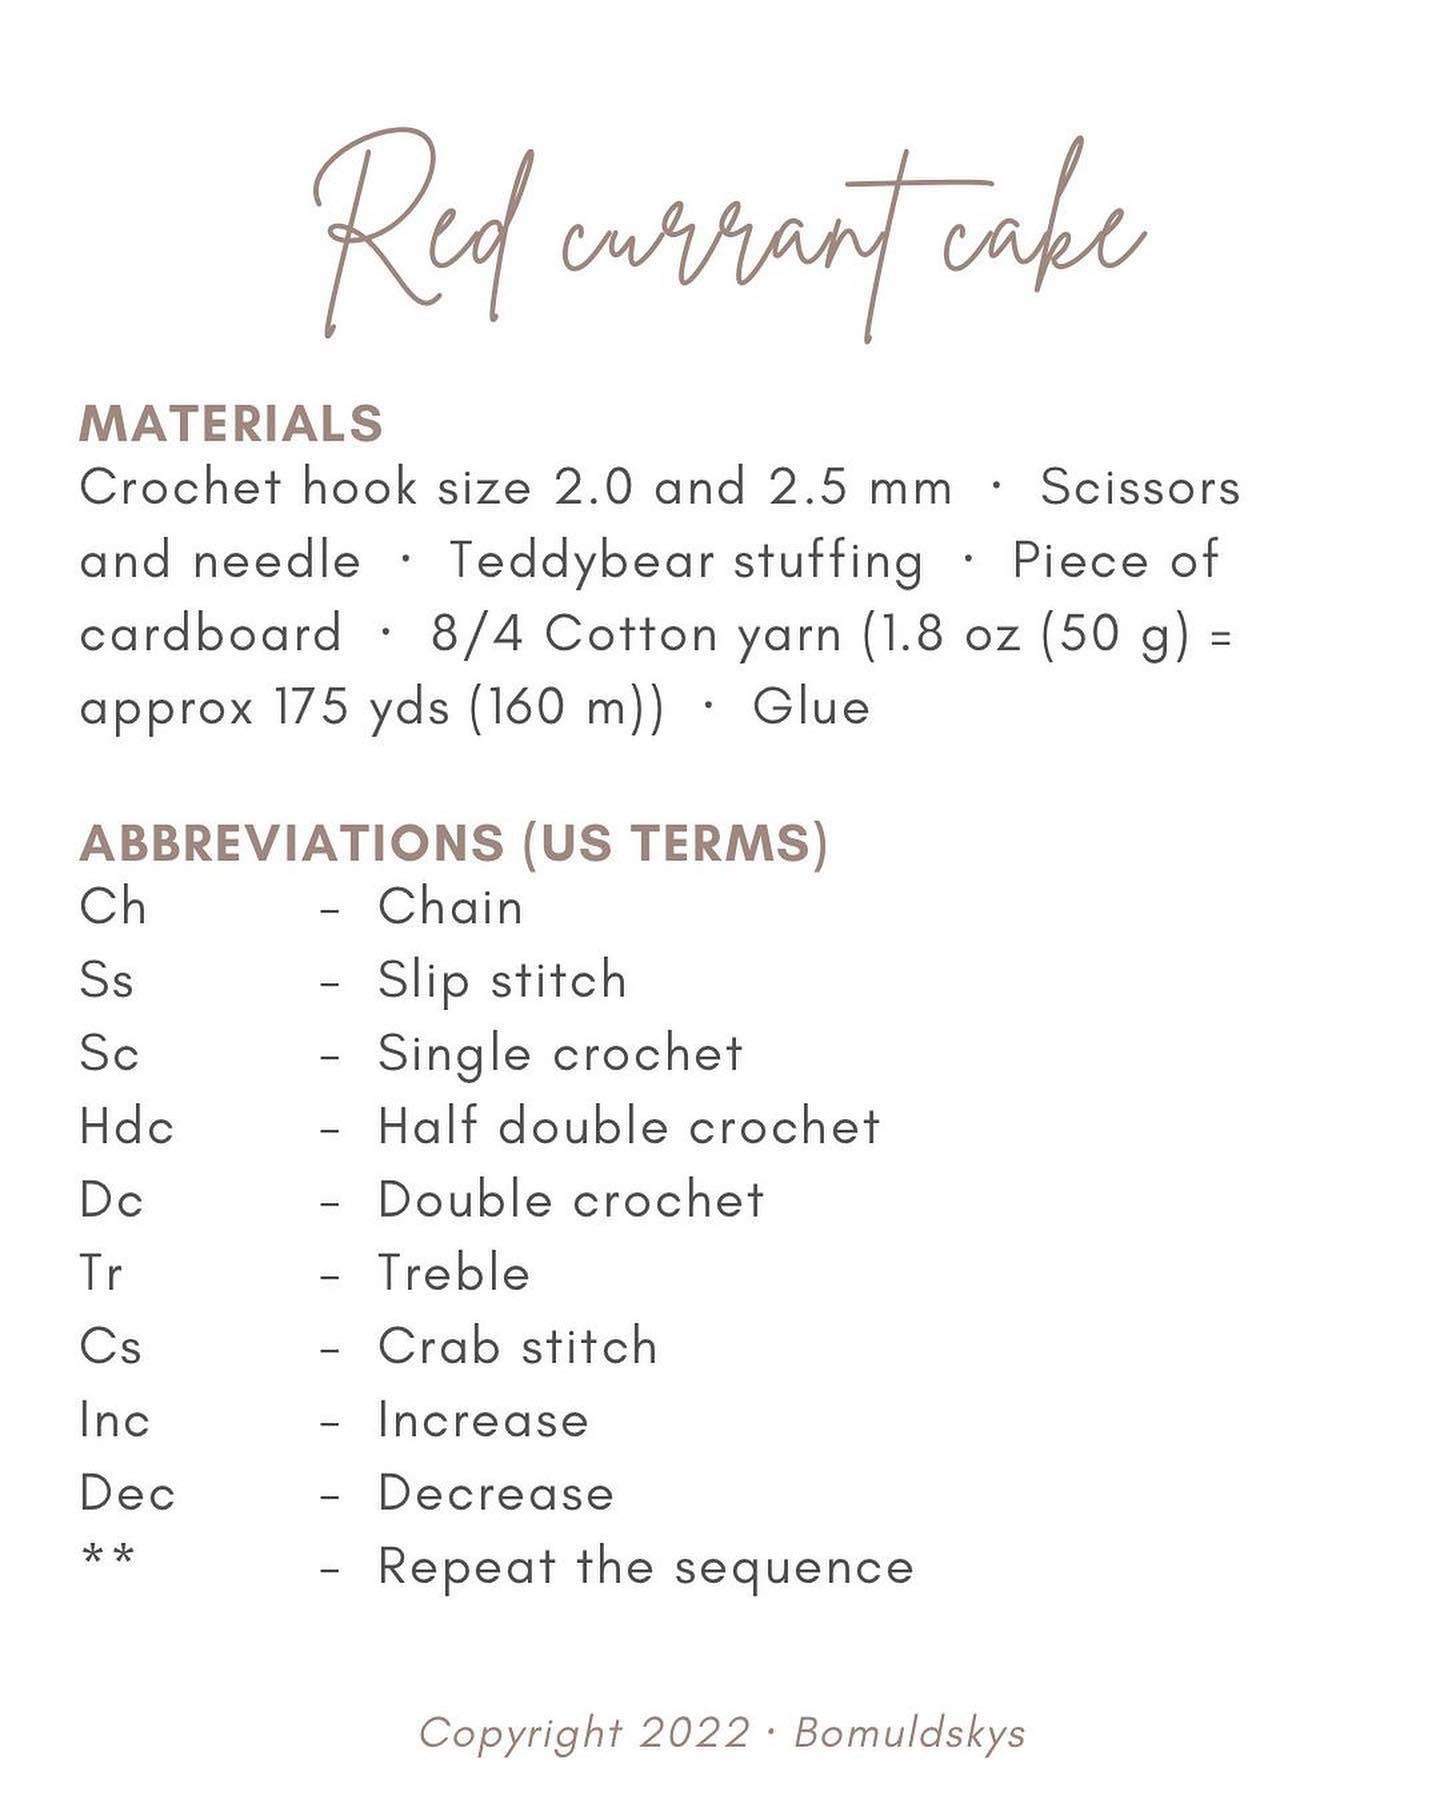 red currant cake crochet pattern